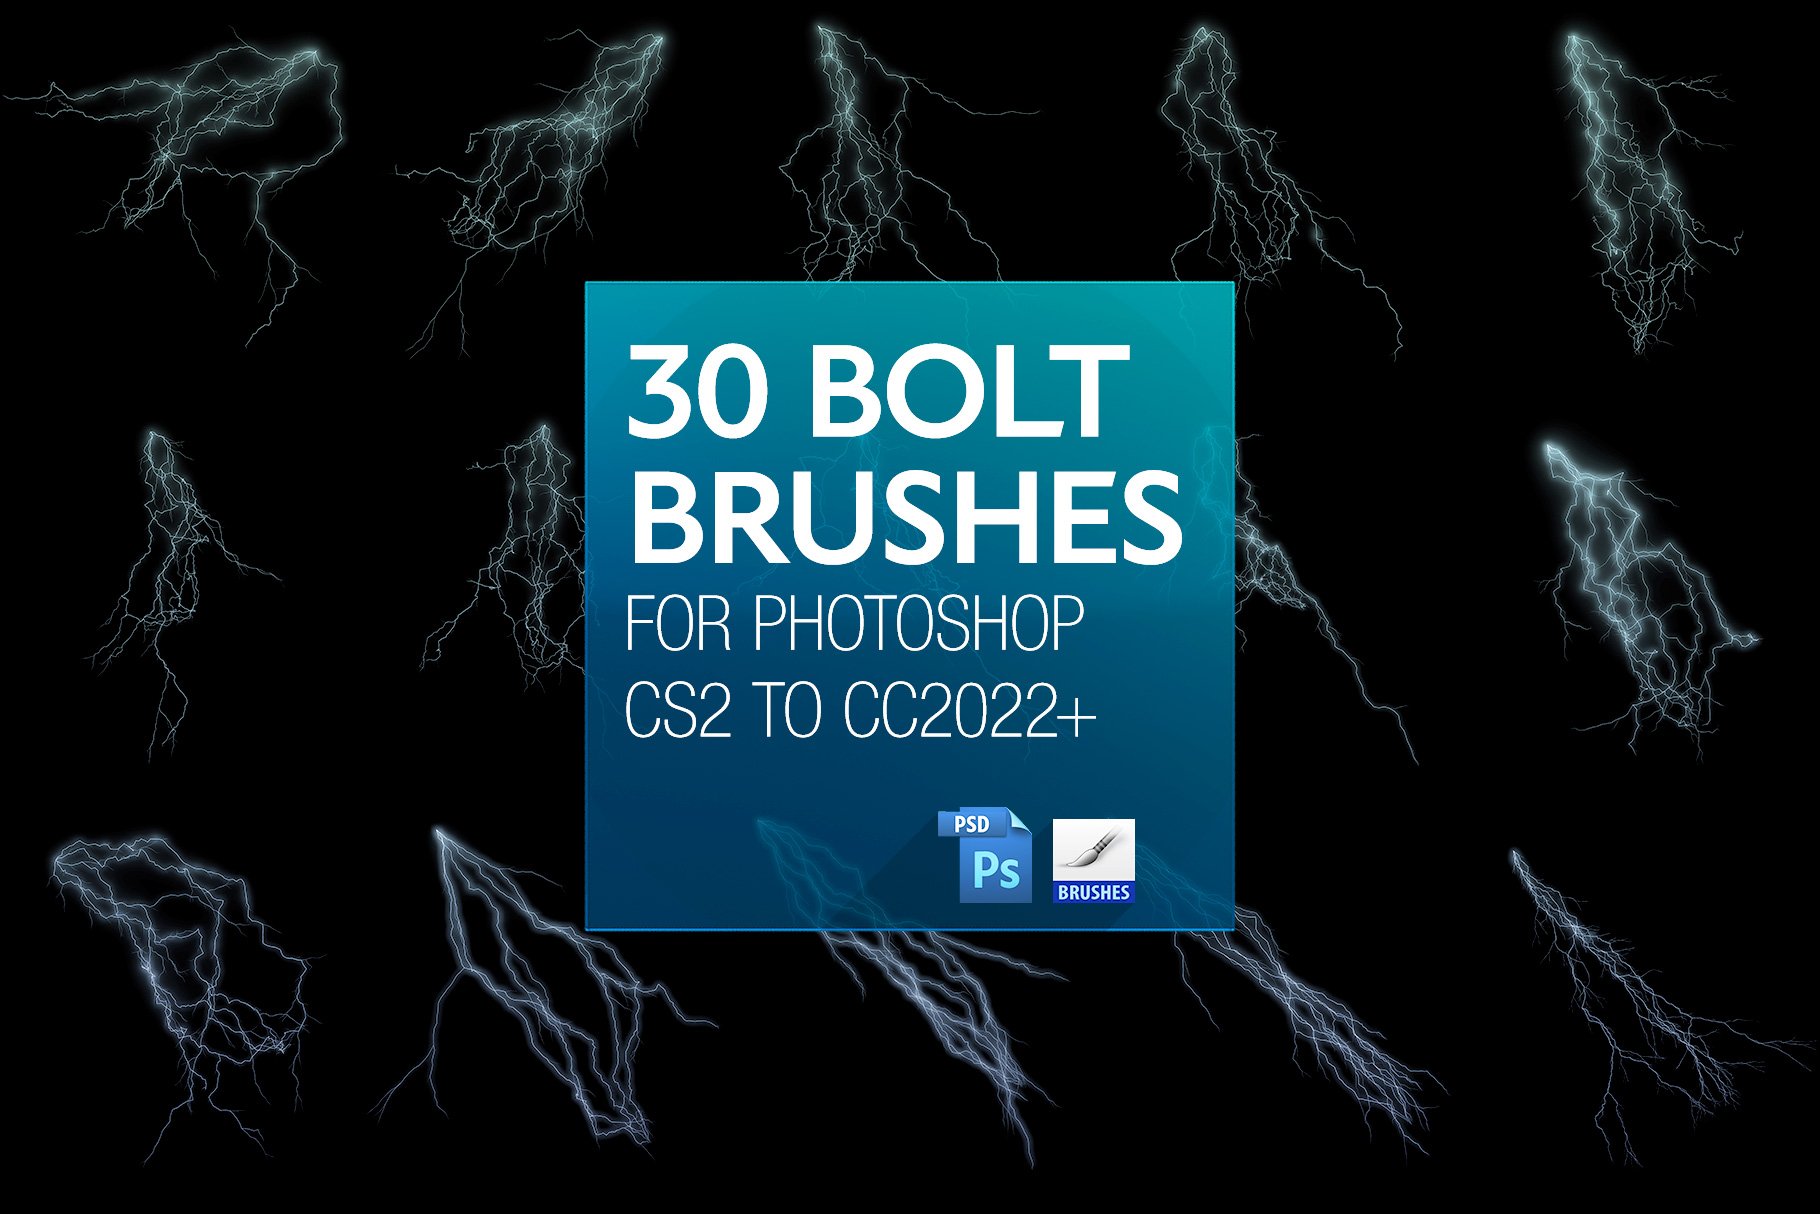 30 Bolt Brushes for PS CS2 to CC202+cover image.